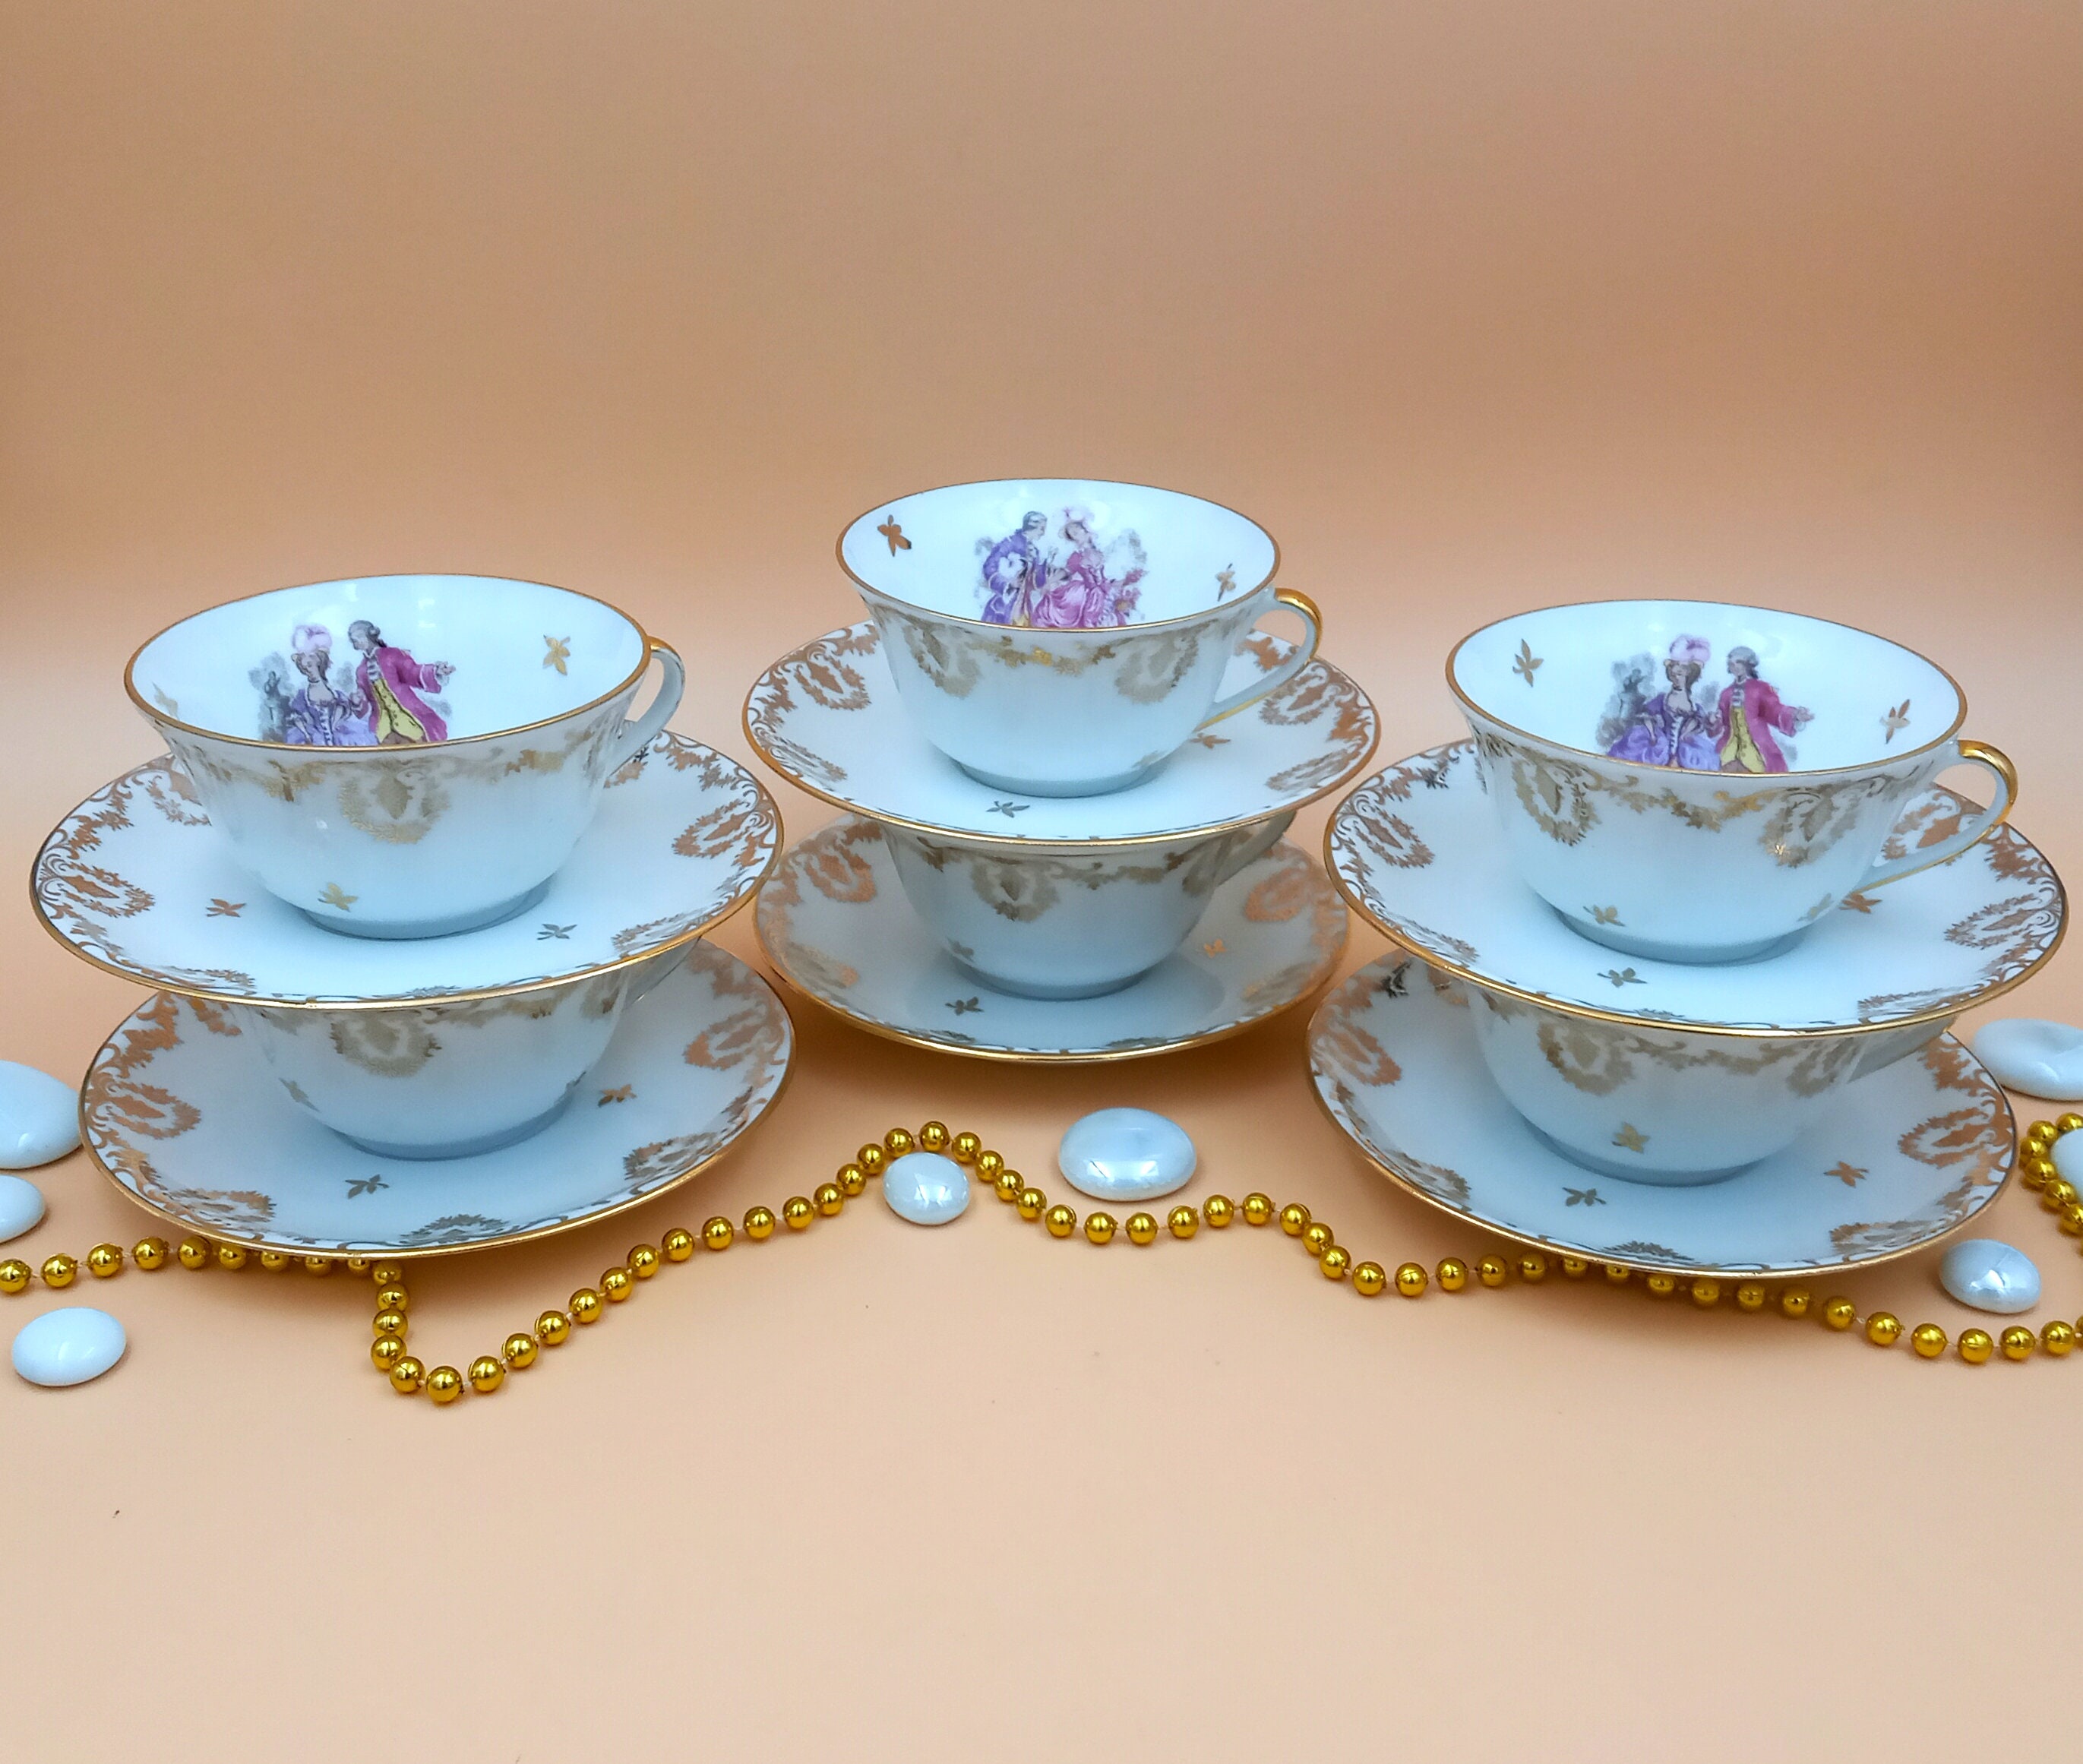 Beautiful Rare Coffee Service From Wloclawek Porcelana Made in Poland White  Lilac-like Color With Mother-of-pearl Effect With Romantic Picture 